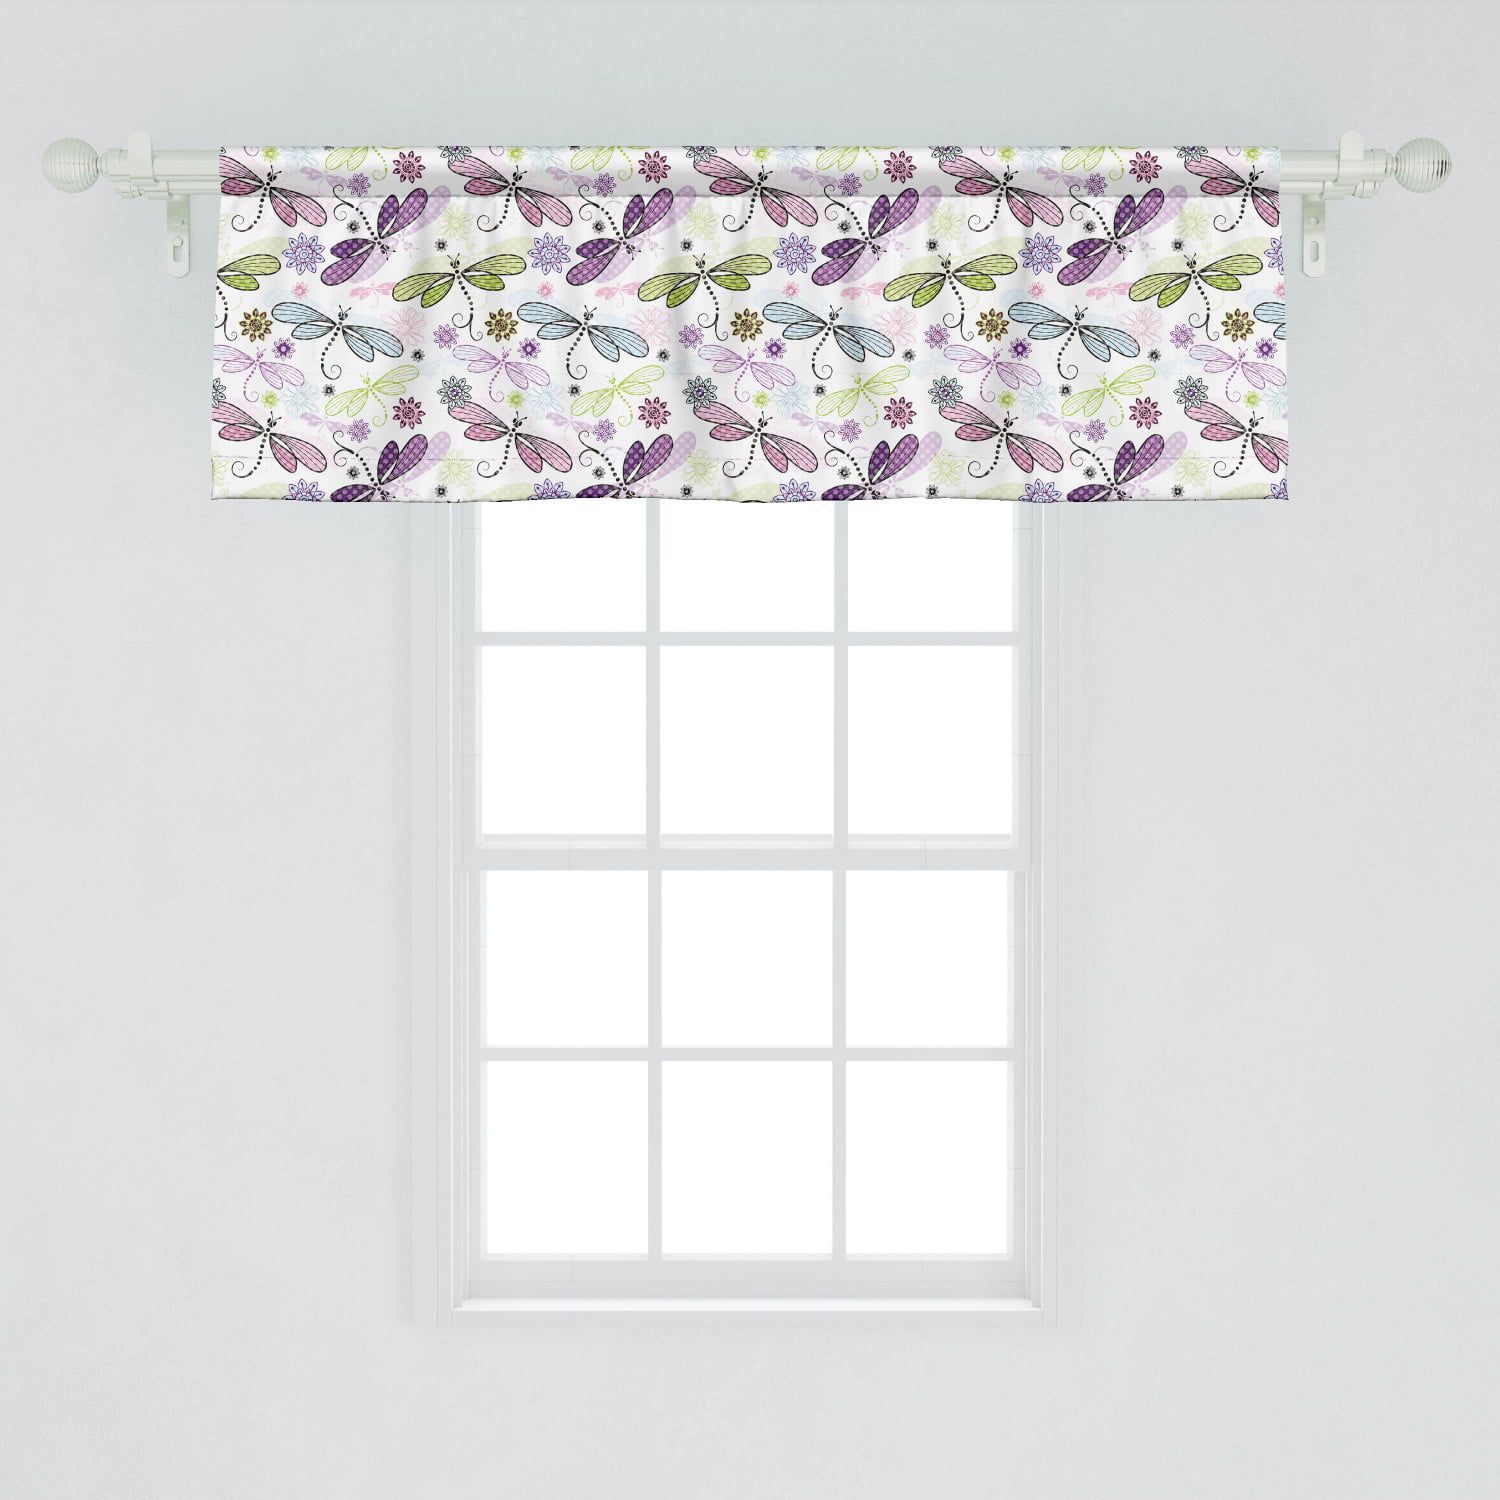 Dragonfly Bug Window Valance Curtain in Your Choice of Colors 